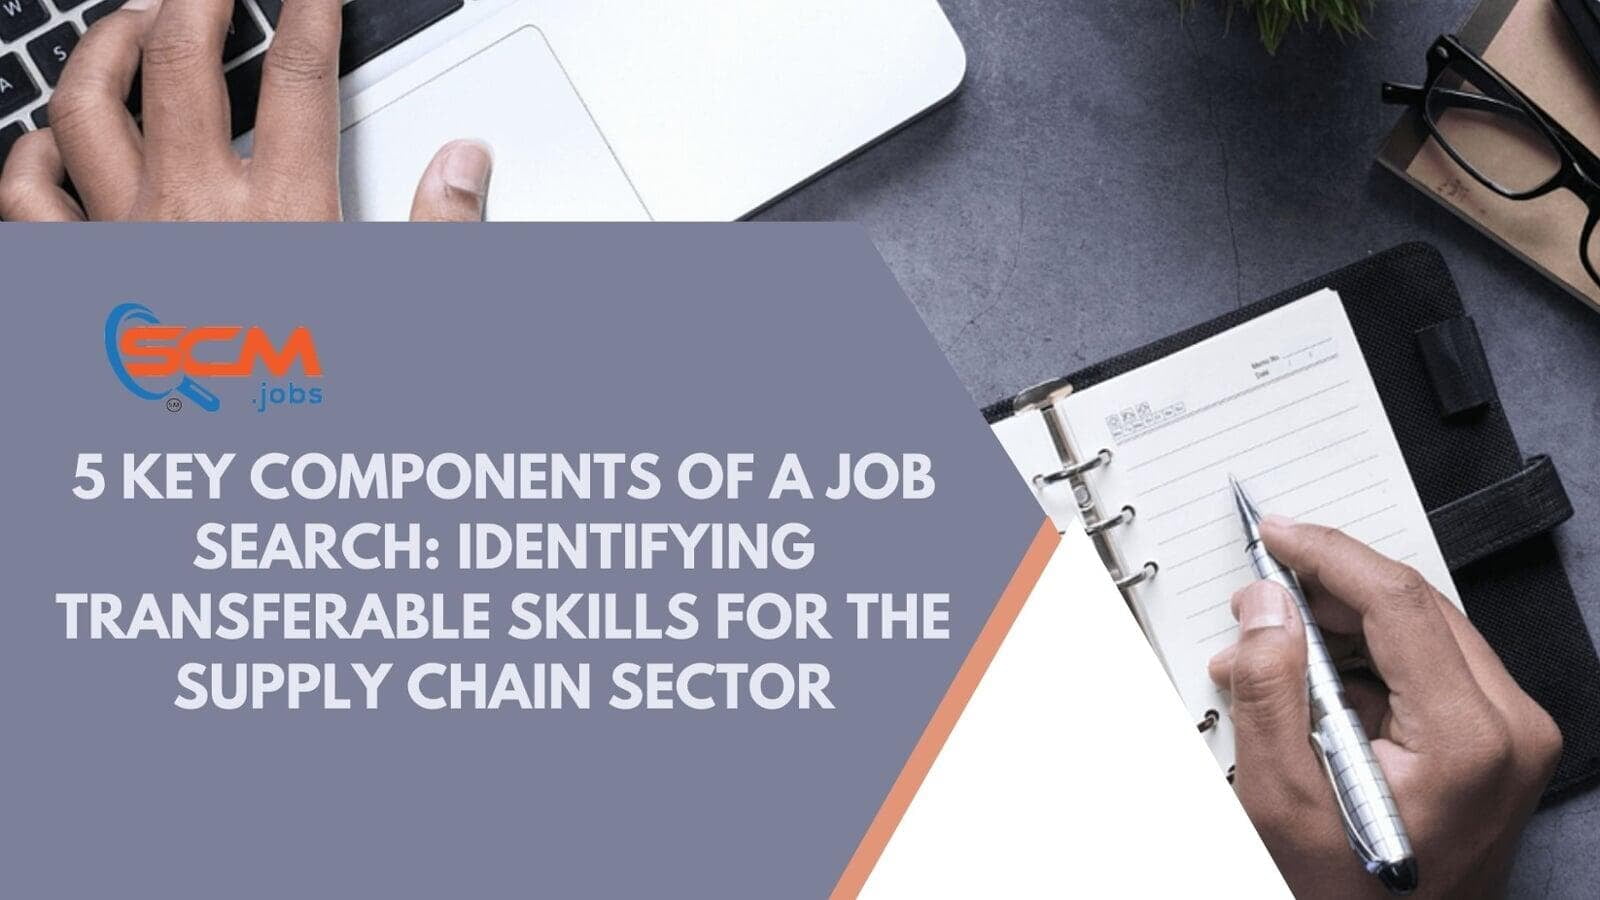 5 Key Components of a Job Search: Identifying Transferable Skills for the Supply Chain Sector